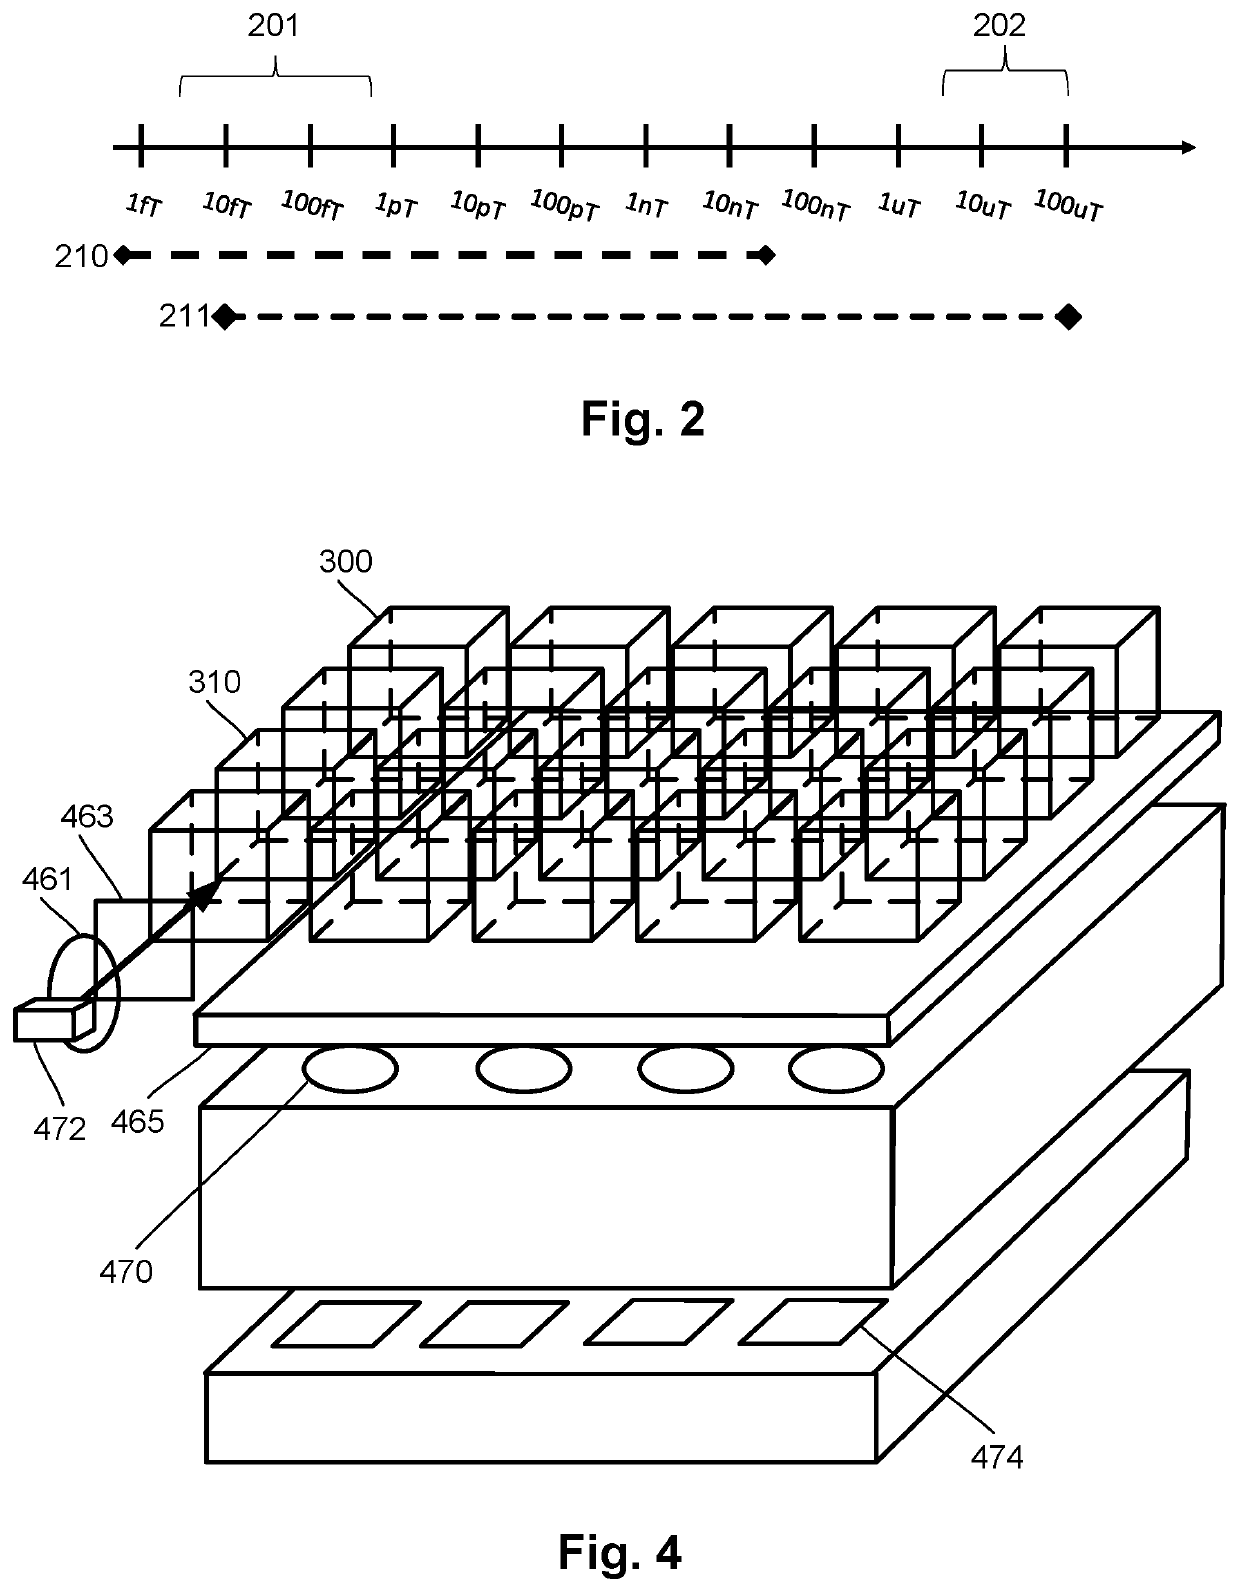 Systems and methods having an optical magnetometer array with beam splitters